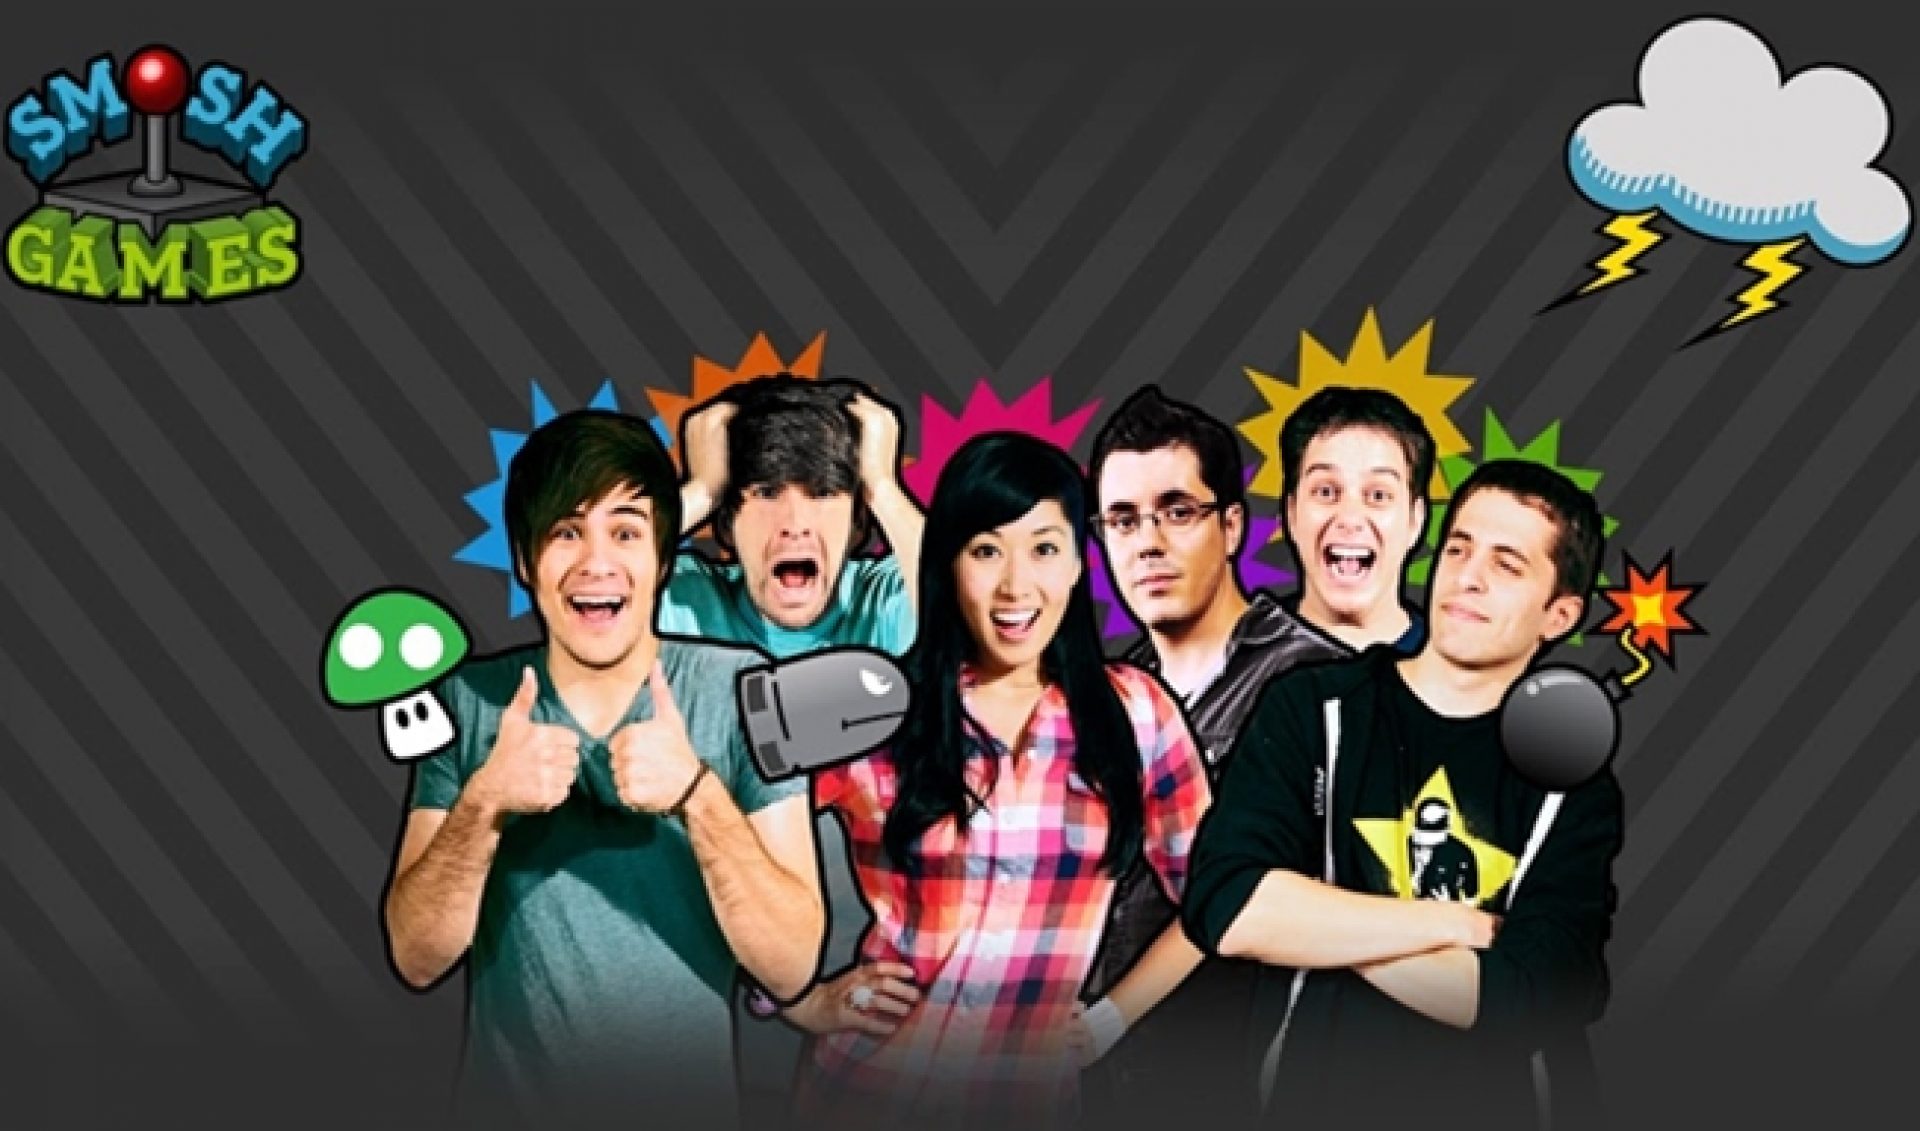 Now One Year Old, Smosh Games Has 3.2 Million Subs, 428 Million Views